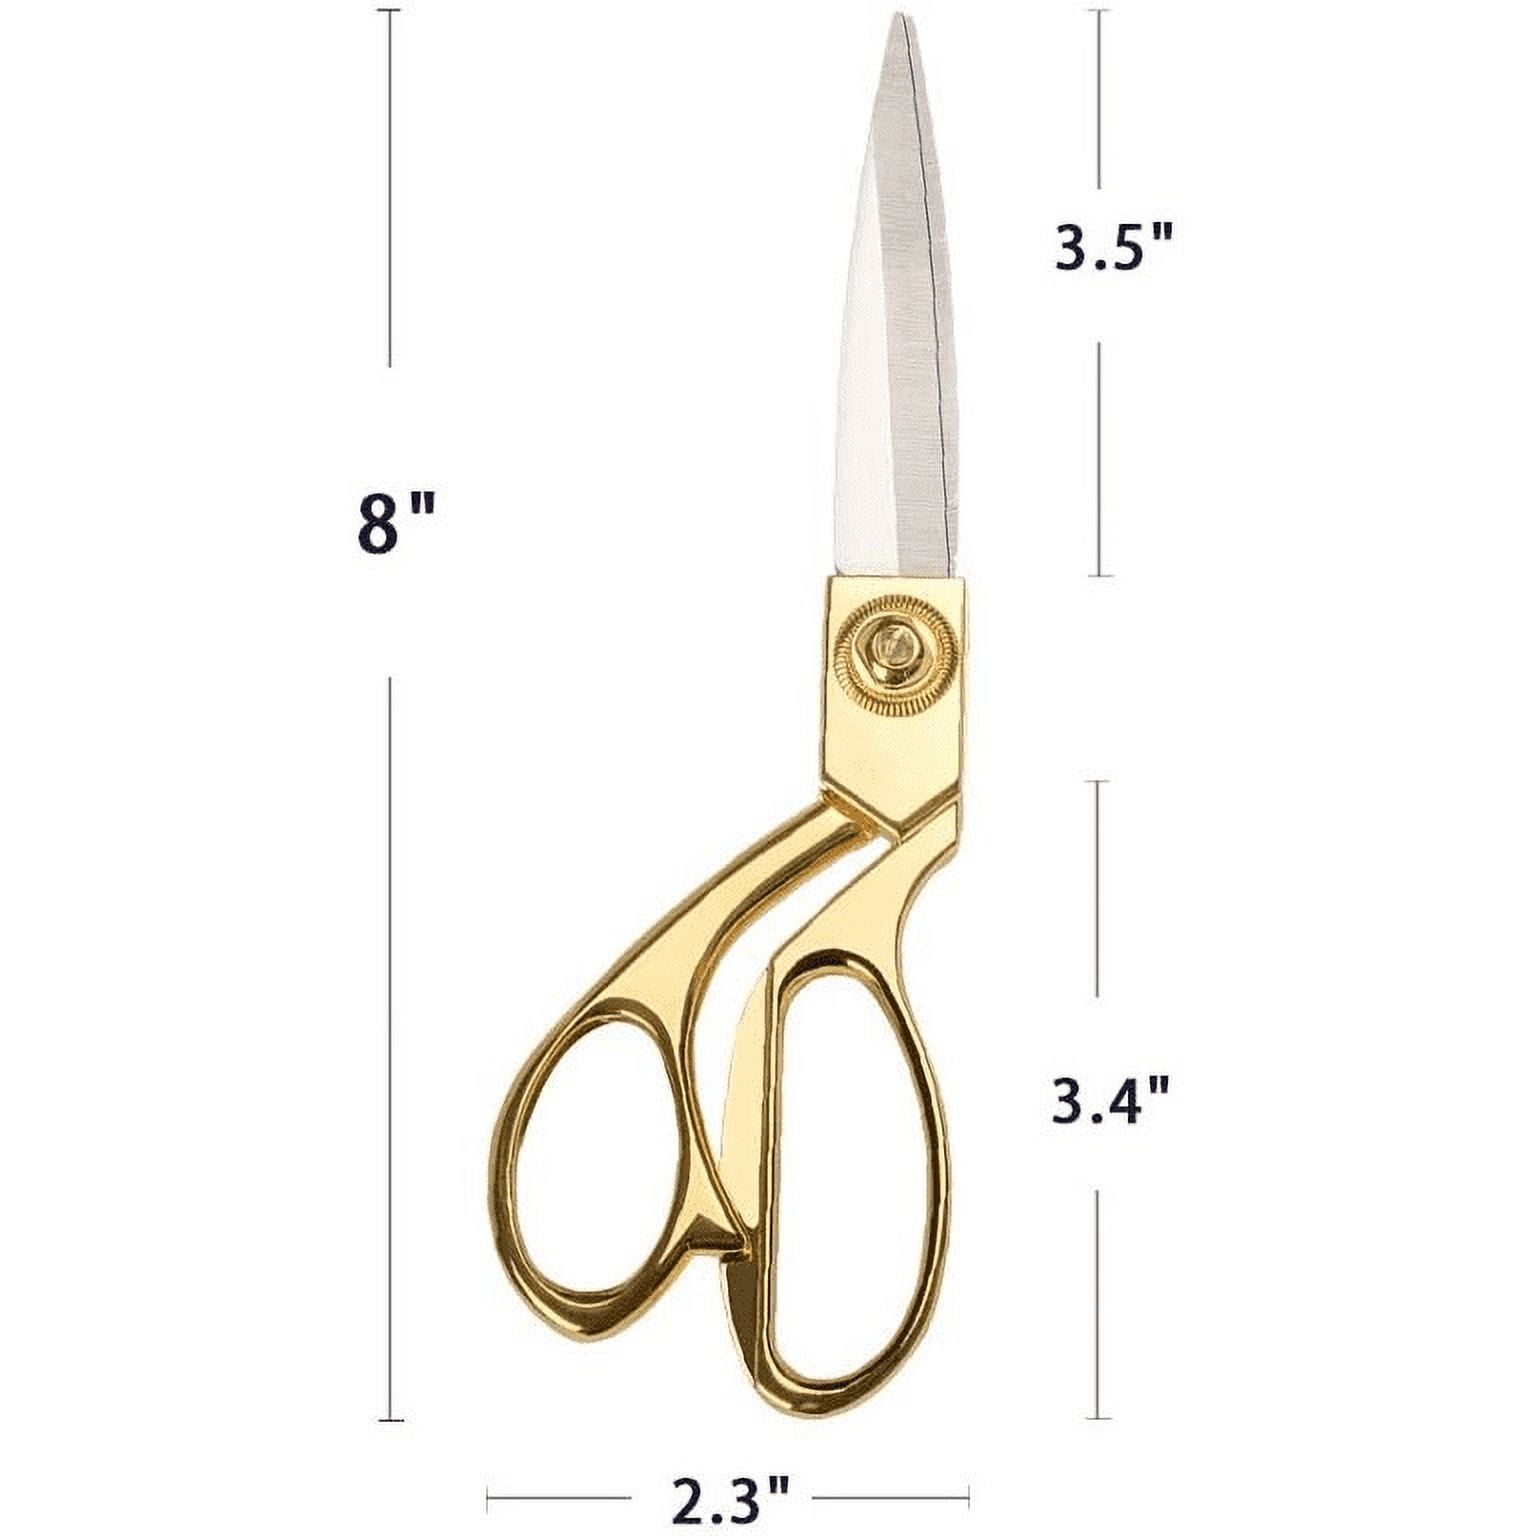 Happon Scissors 8.8 inch - Professional Heavy Duty Industrial Strength  Stainless Steel Tailor Scissor Shears for Fabric Leather Sewing Dressmaking  Tailoring Home Office Artists Students Black 